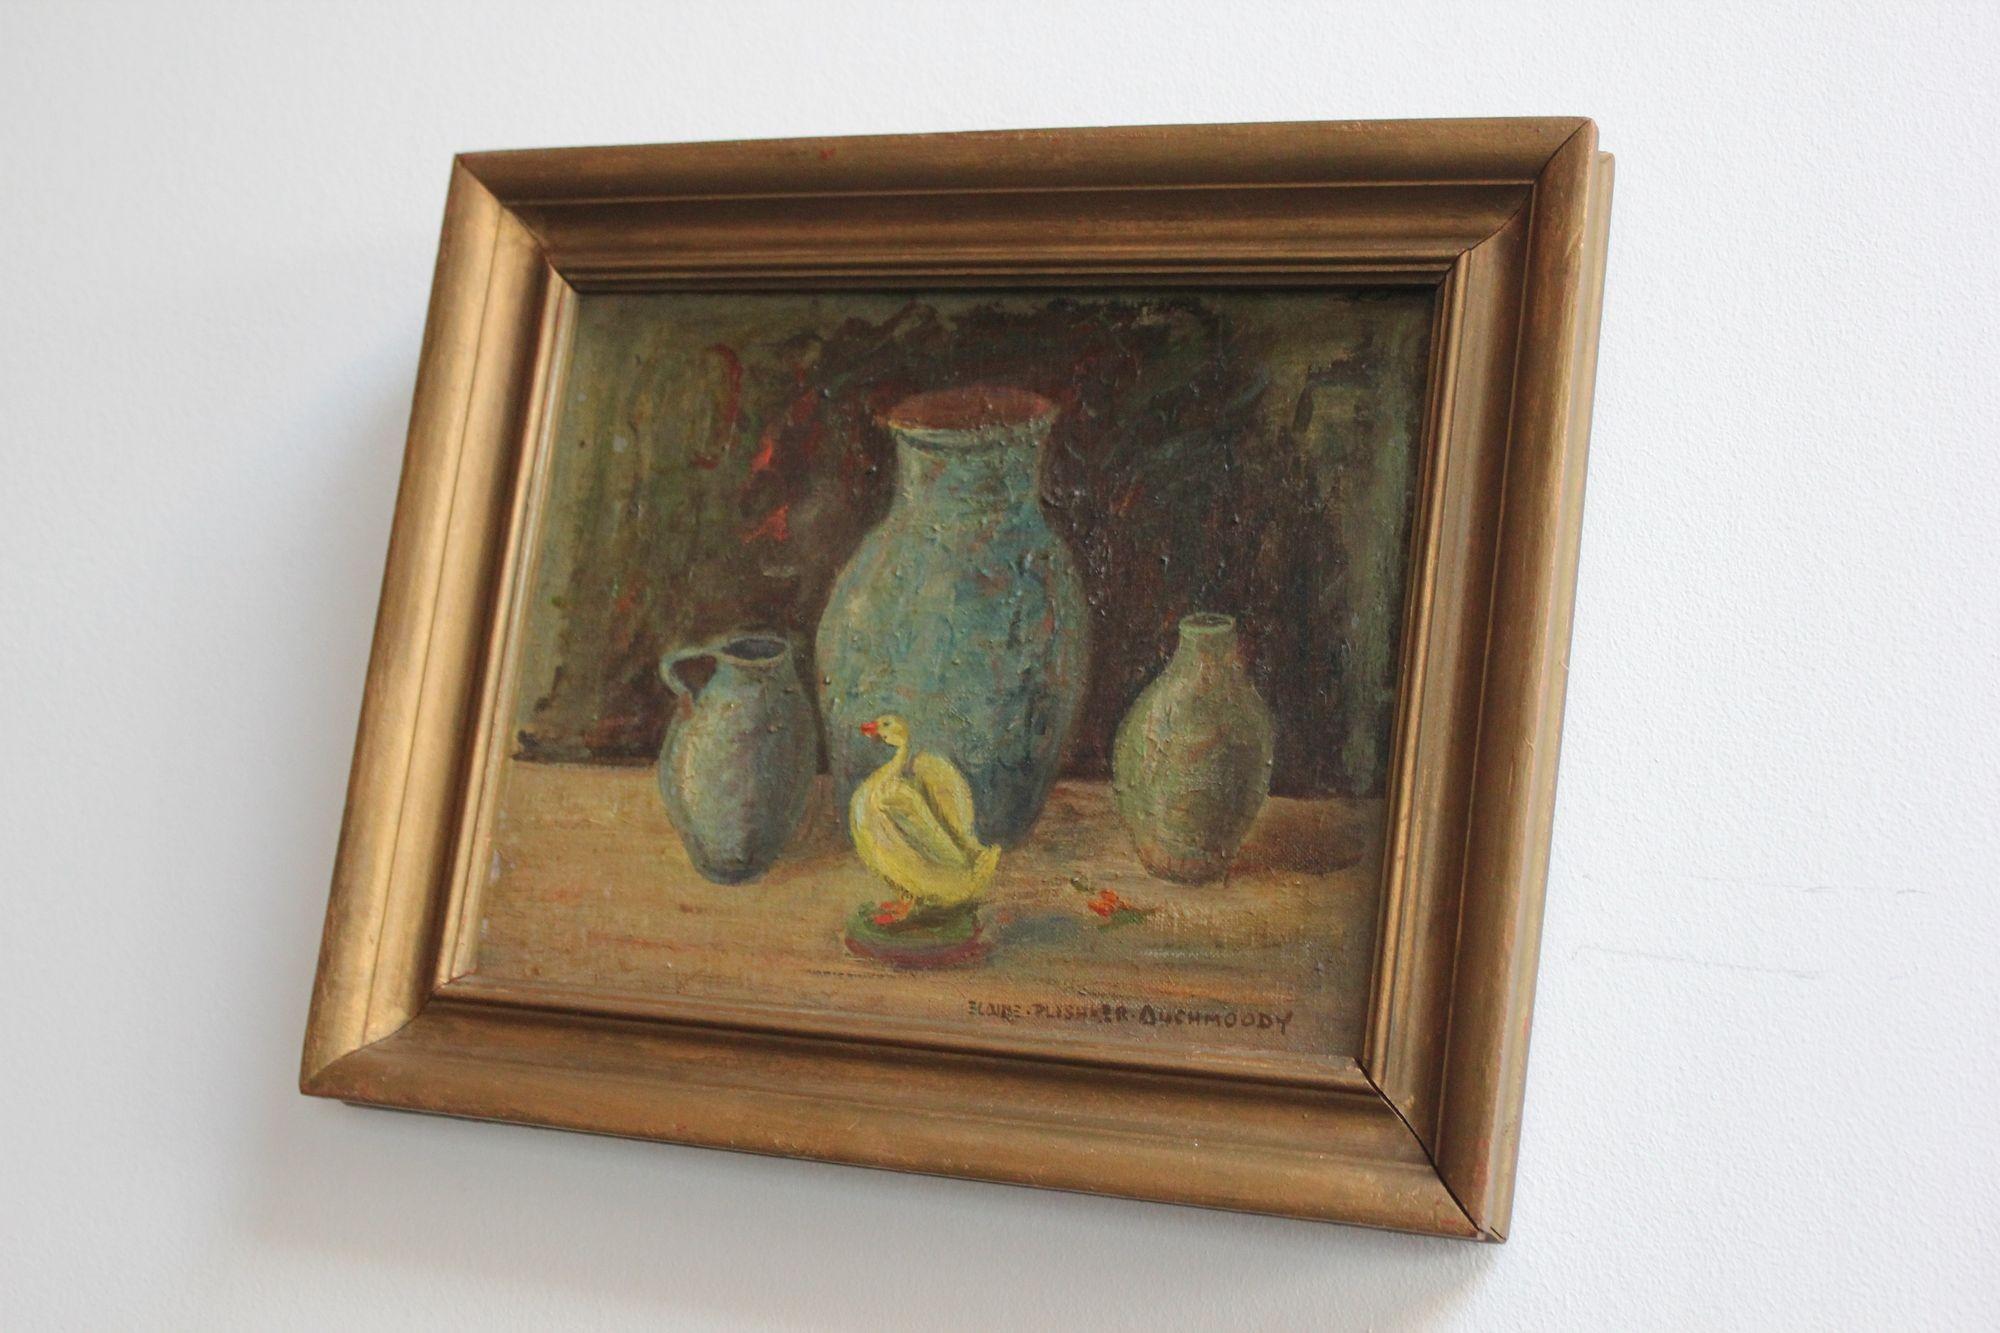 Still life oil painting ca. 1940s depicting a 'duck' figurine amid vessels by Elaine Plishker Auchmoody (b. NYC 1910 - d. Massachusetts 1976).
Auchmoody was a highly-regarded lecturer and esteemed painter whose work was exhibited in notable